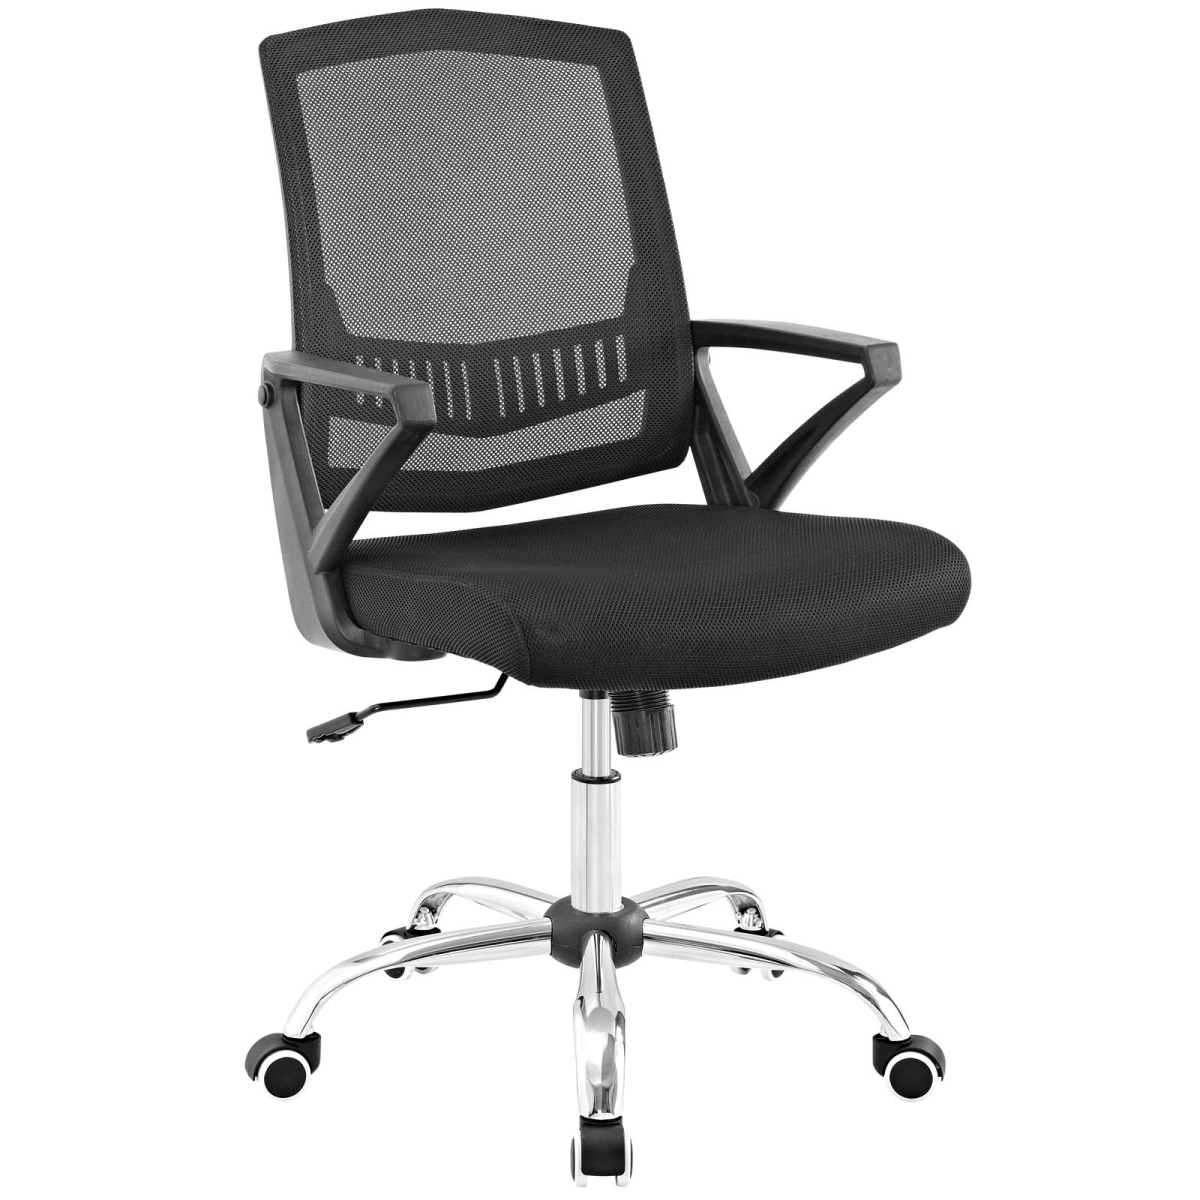 Modway Eei-2684-blk 42.5 H X 26.5 W X 22.5 D In. Proceed Mid Back Upholstered Fabric Office Chair, Black